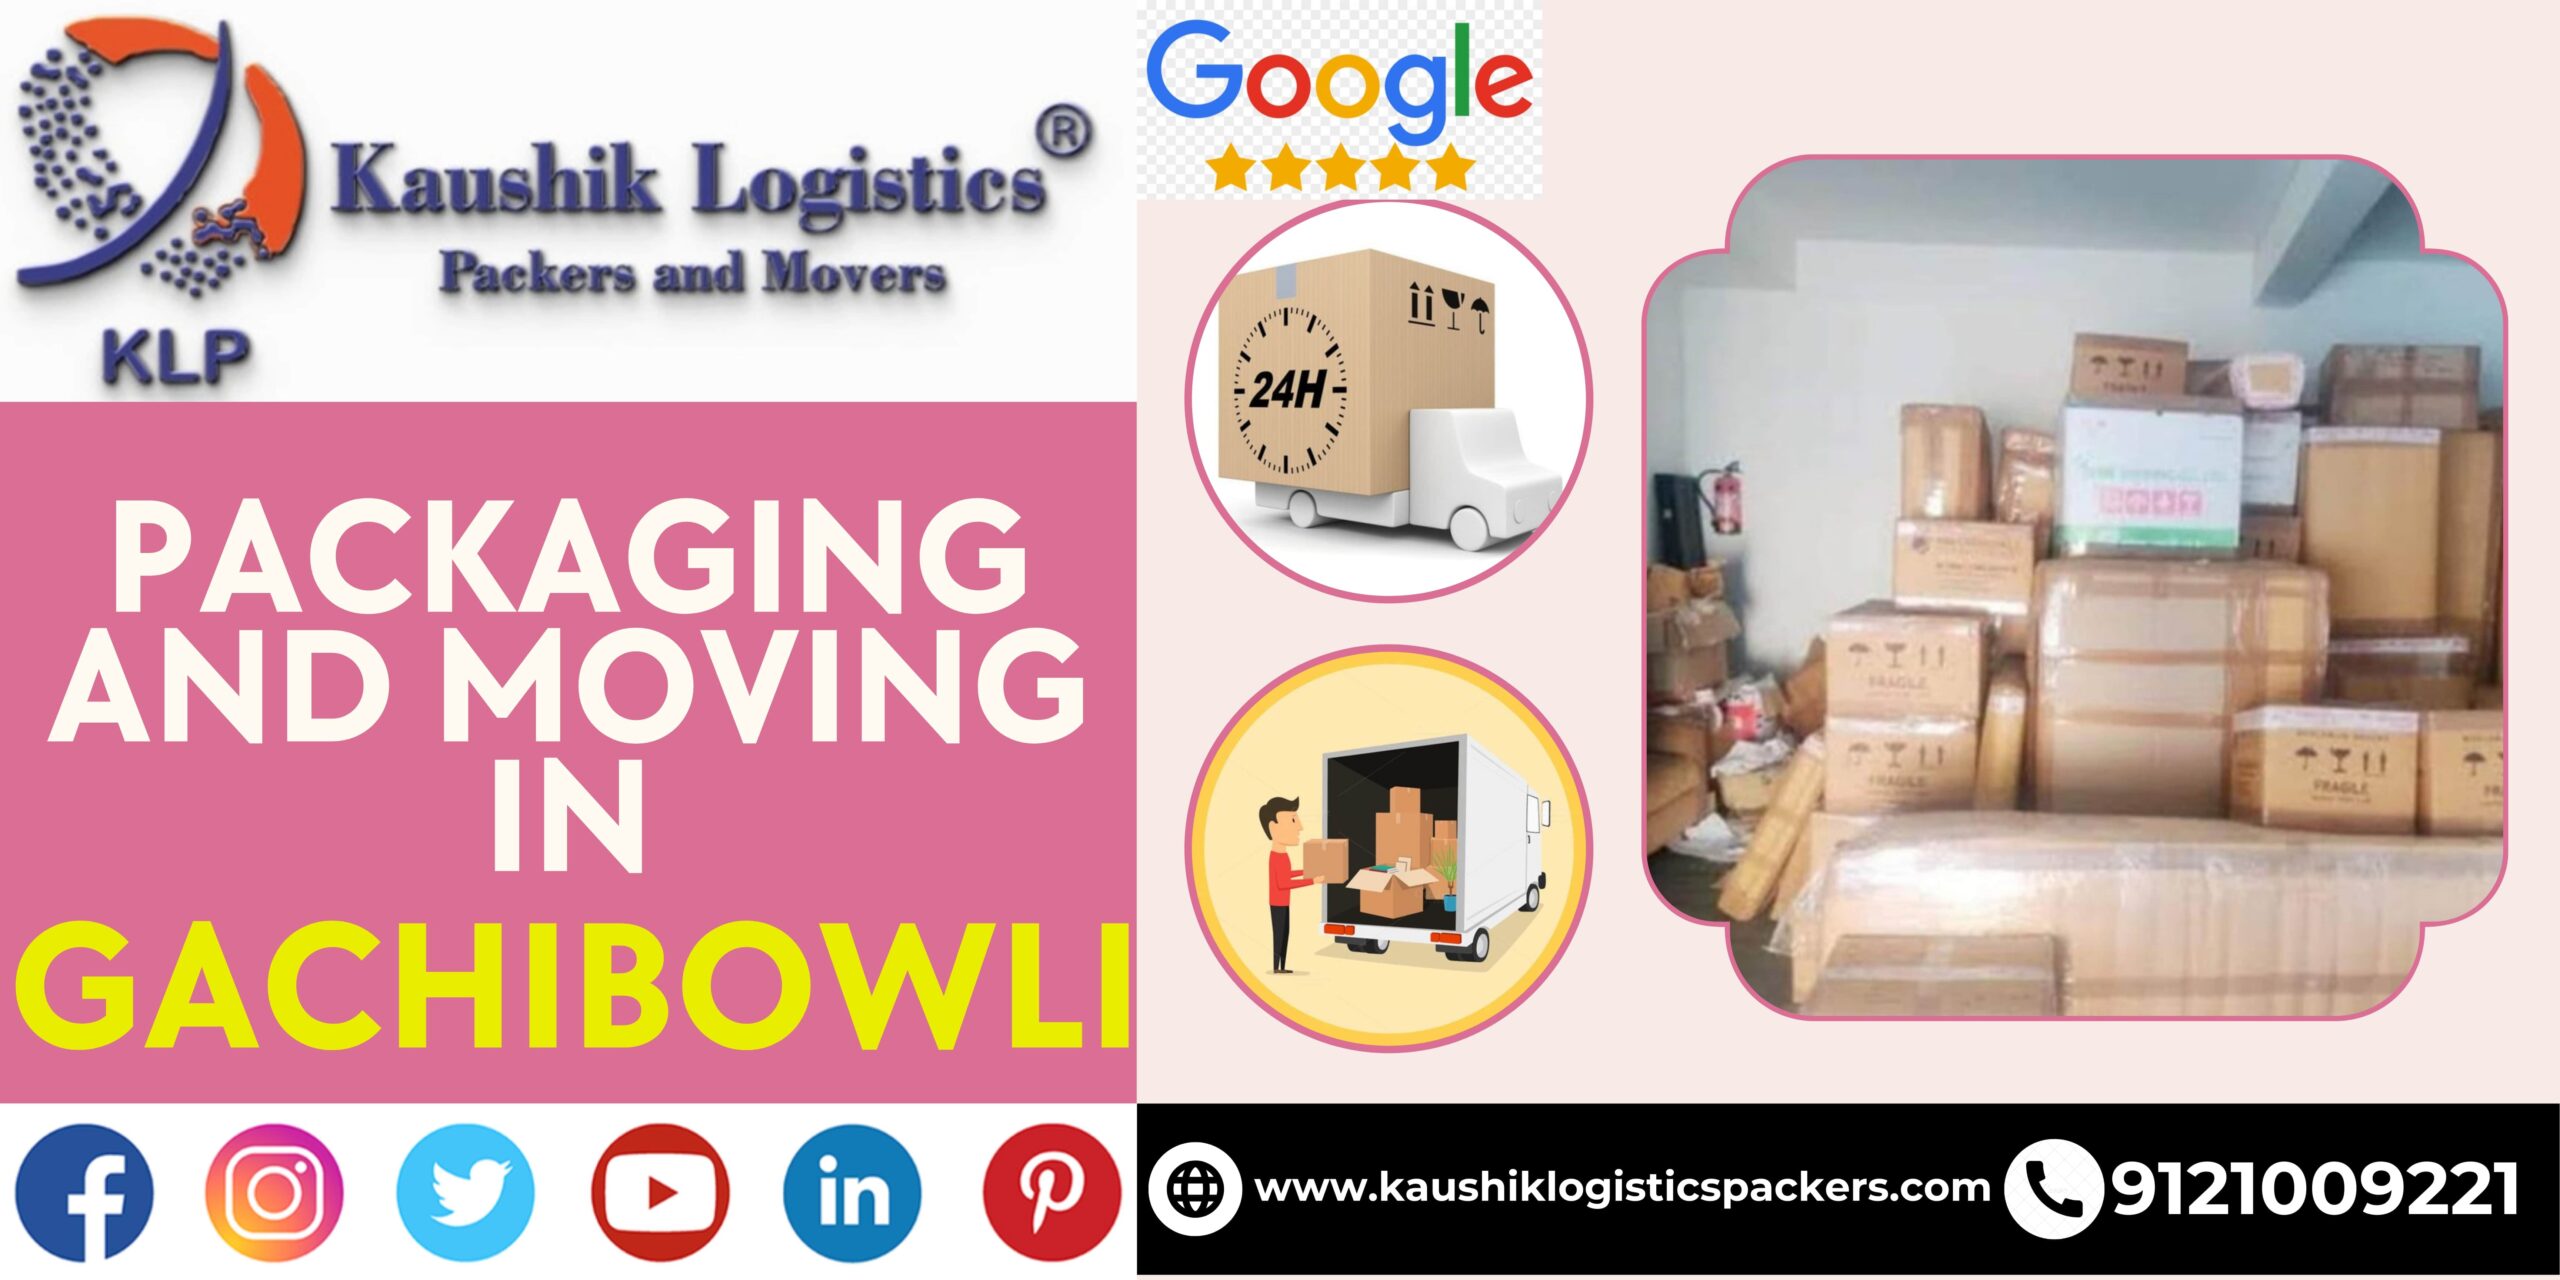 Packers and Movers In Gachibowli